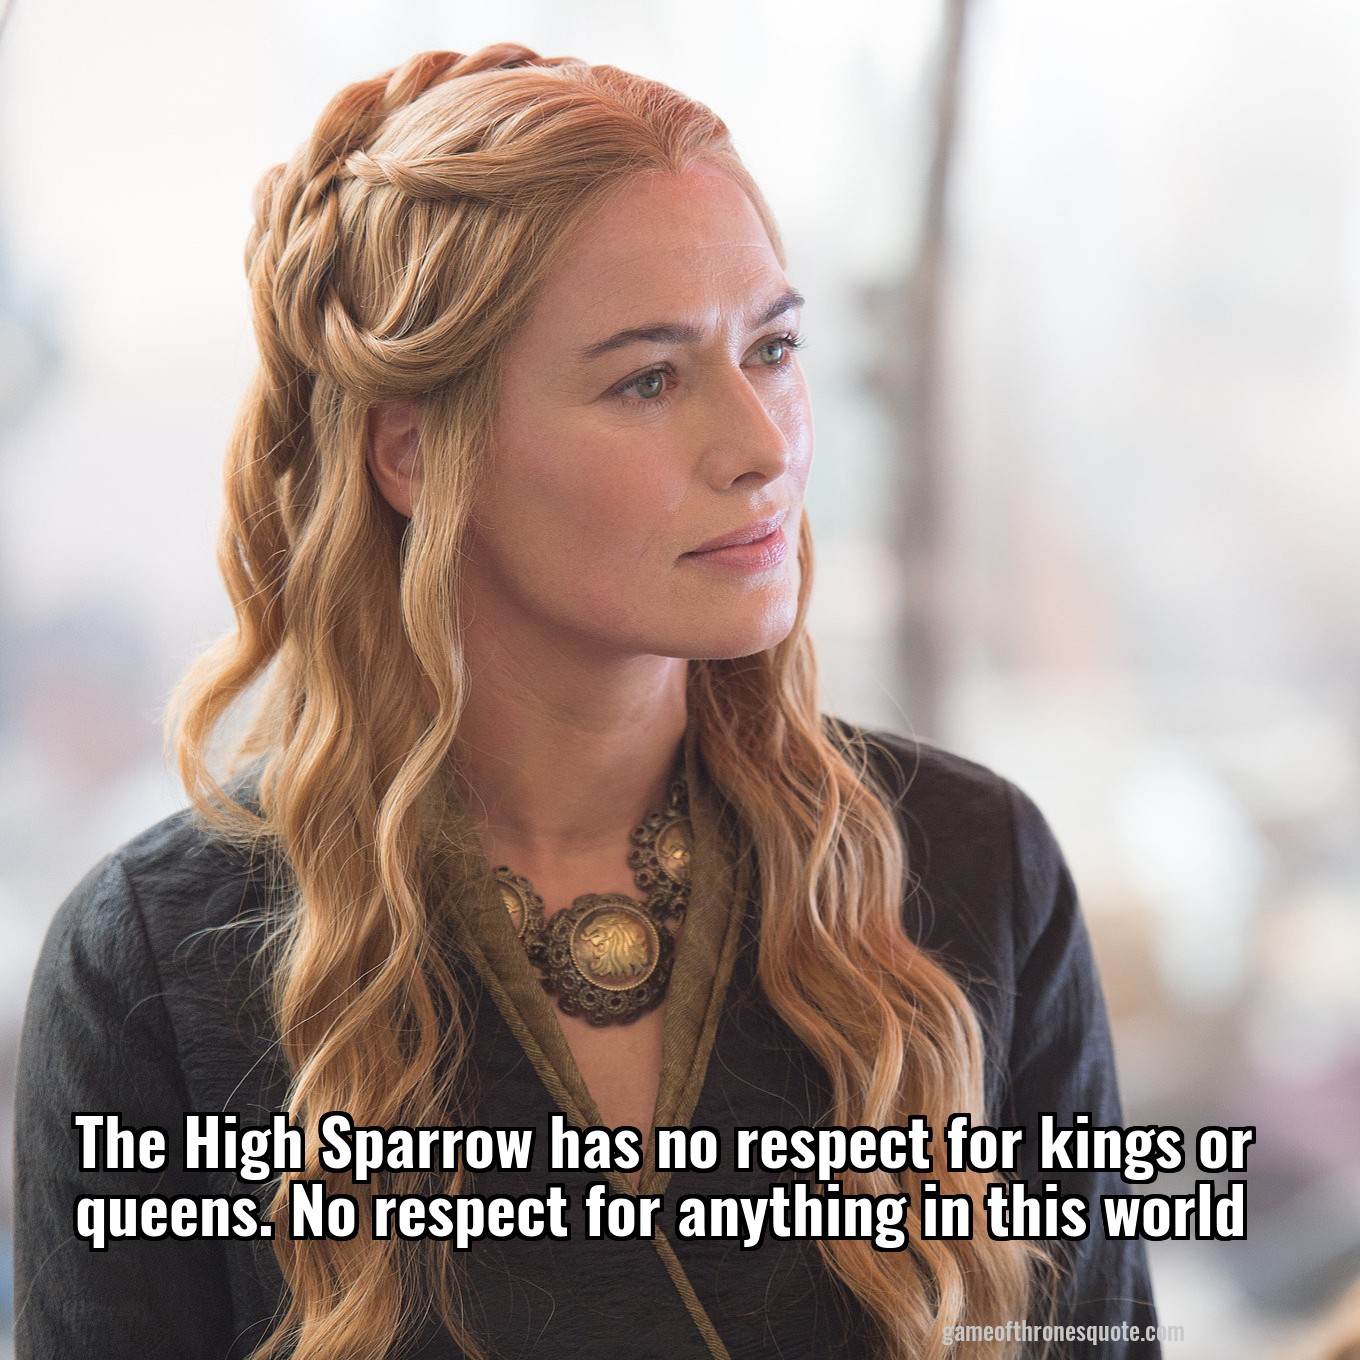 The High Sparrow has no respect for kings or queens. No respect for anything in this world